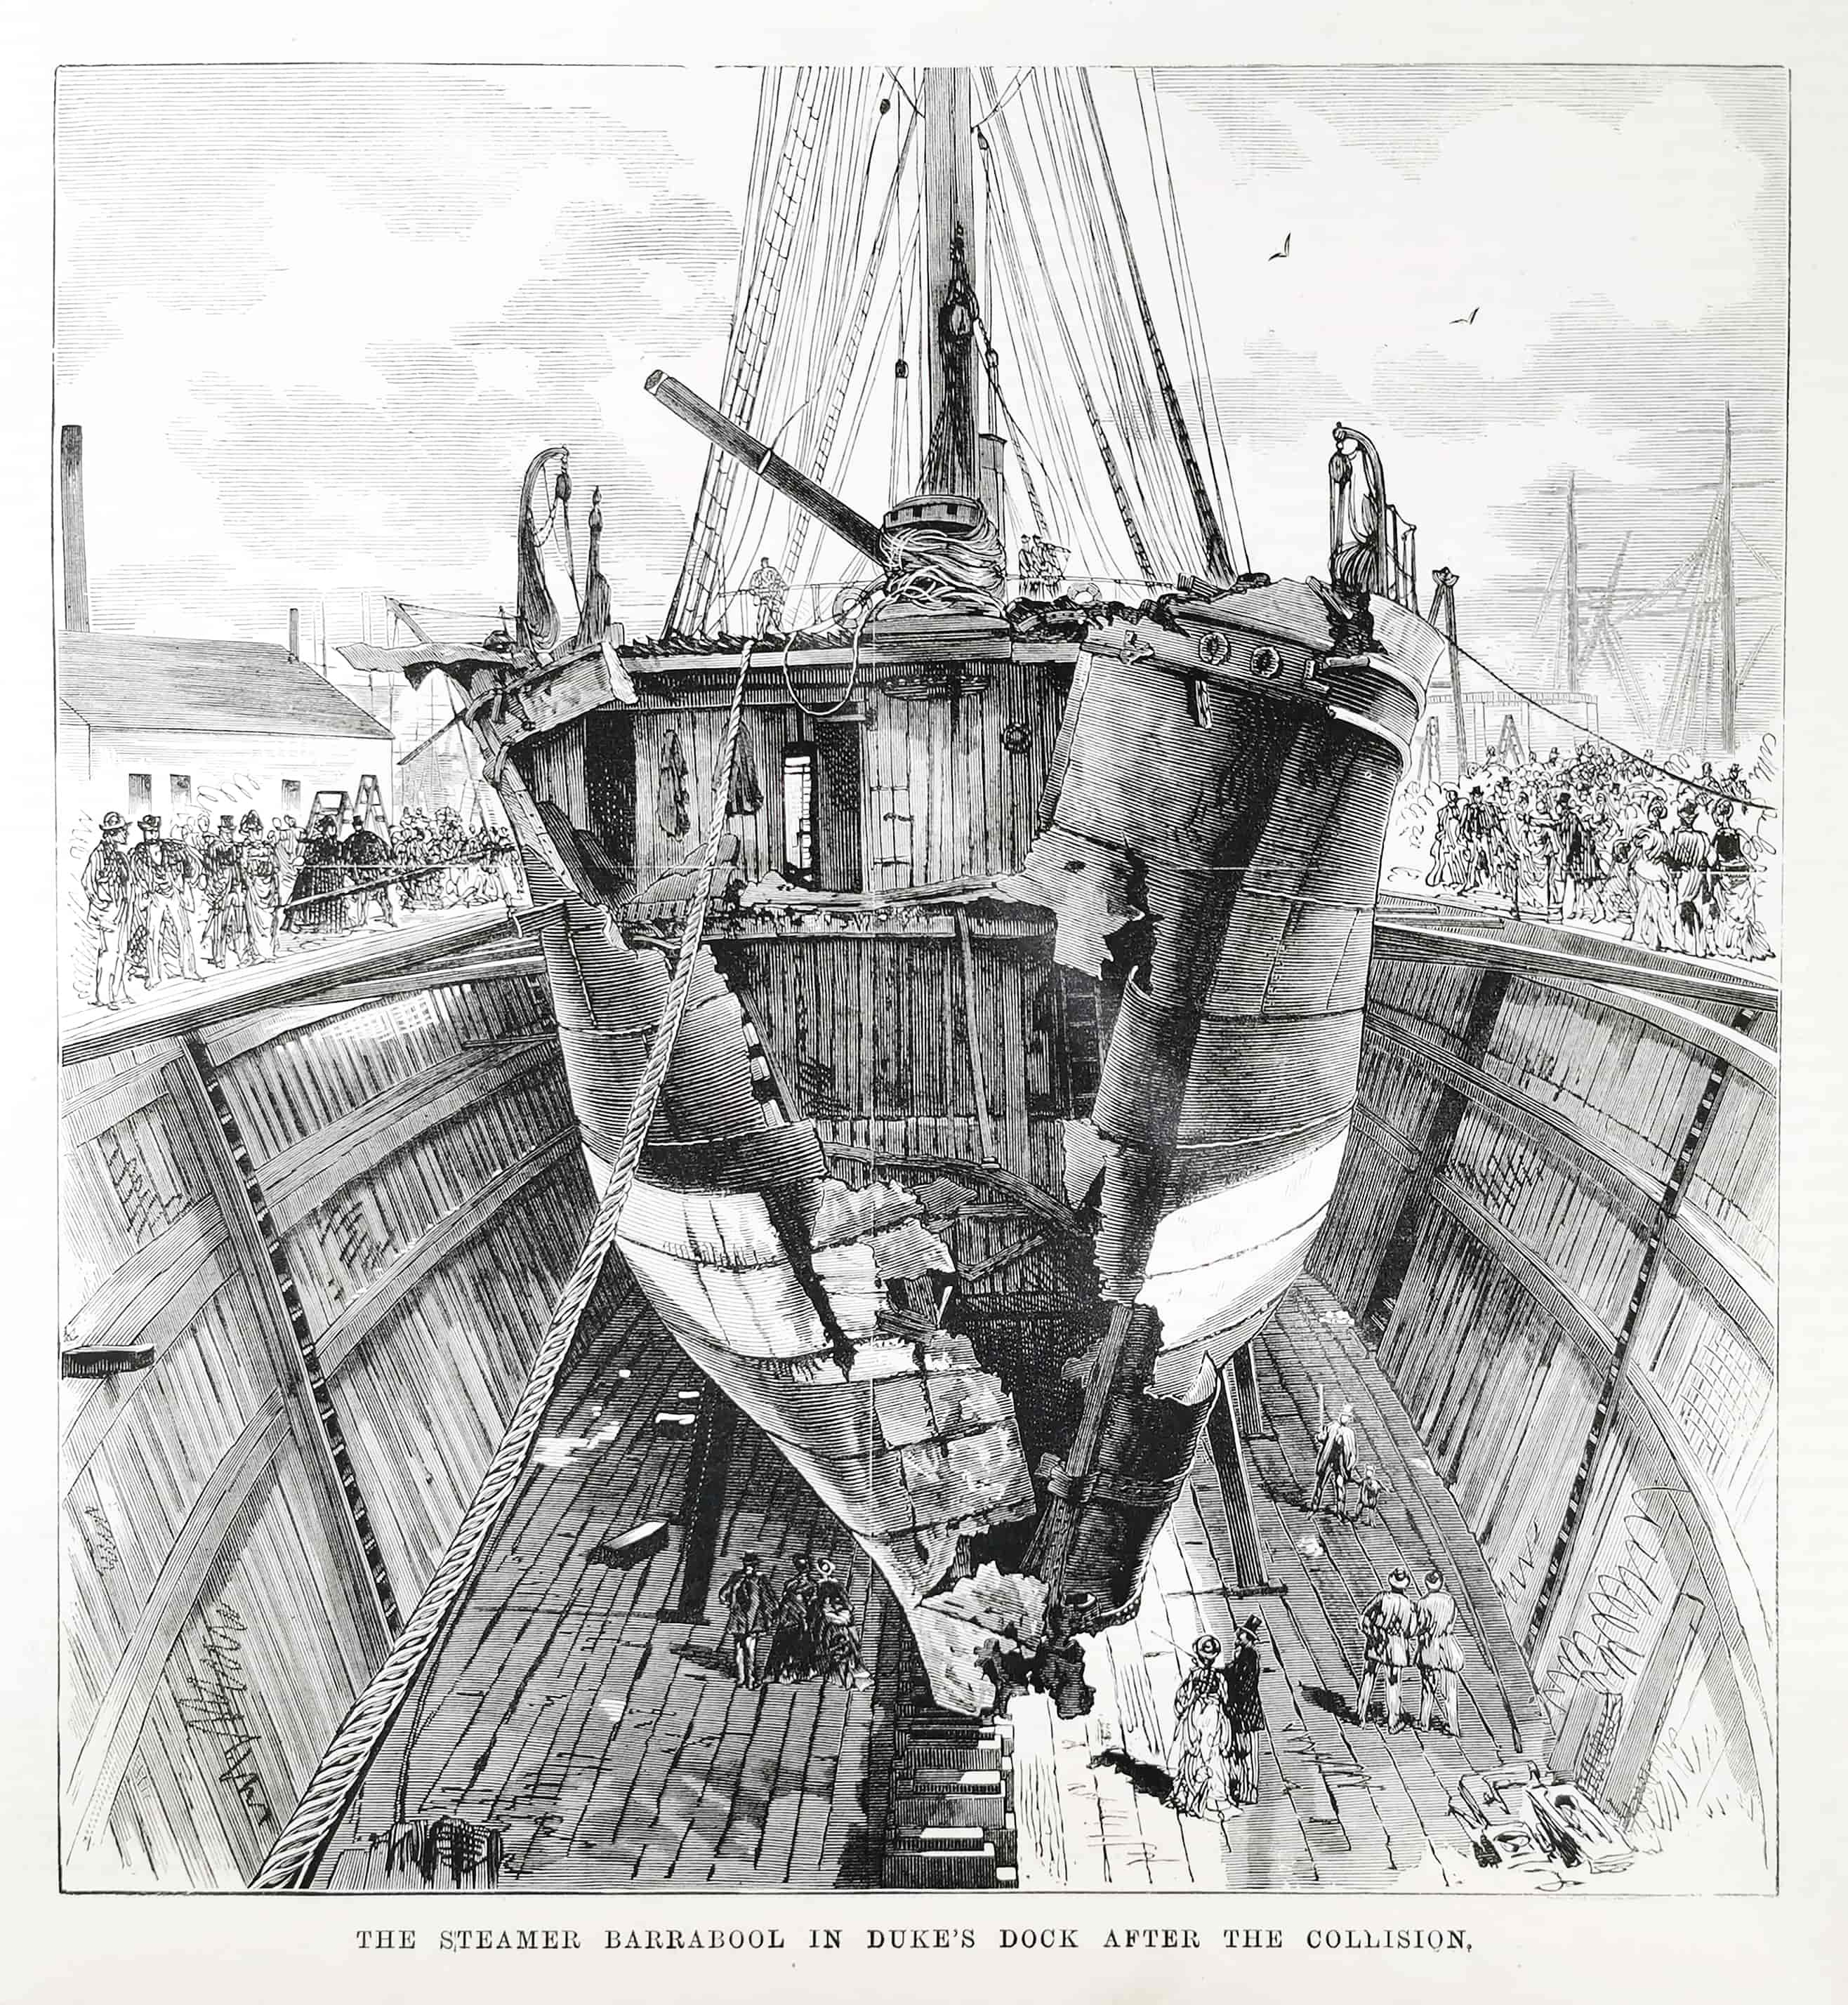 The Steamer Barrabool in Duke's Dock After the Collision. - Antique Print from 1876